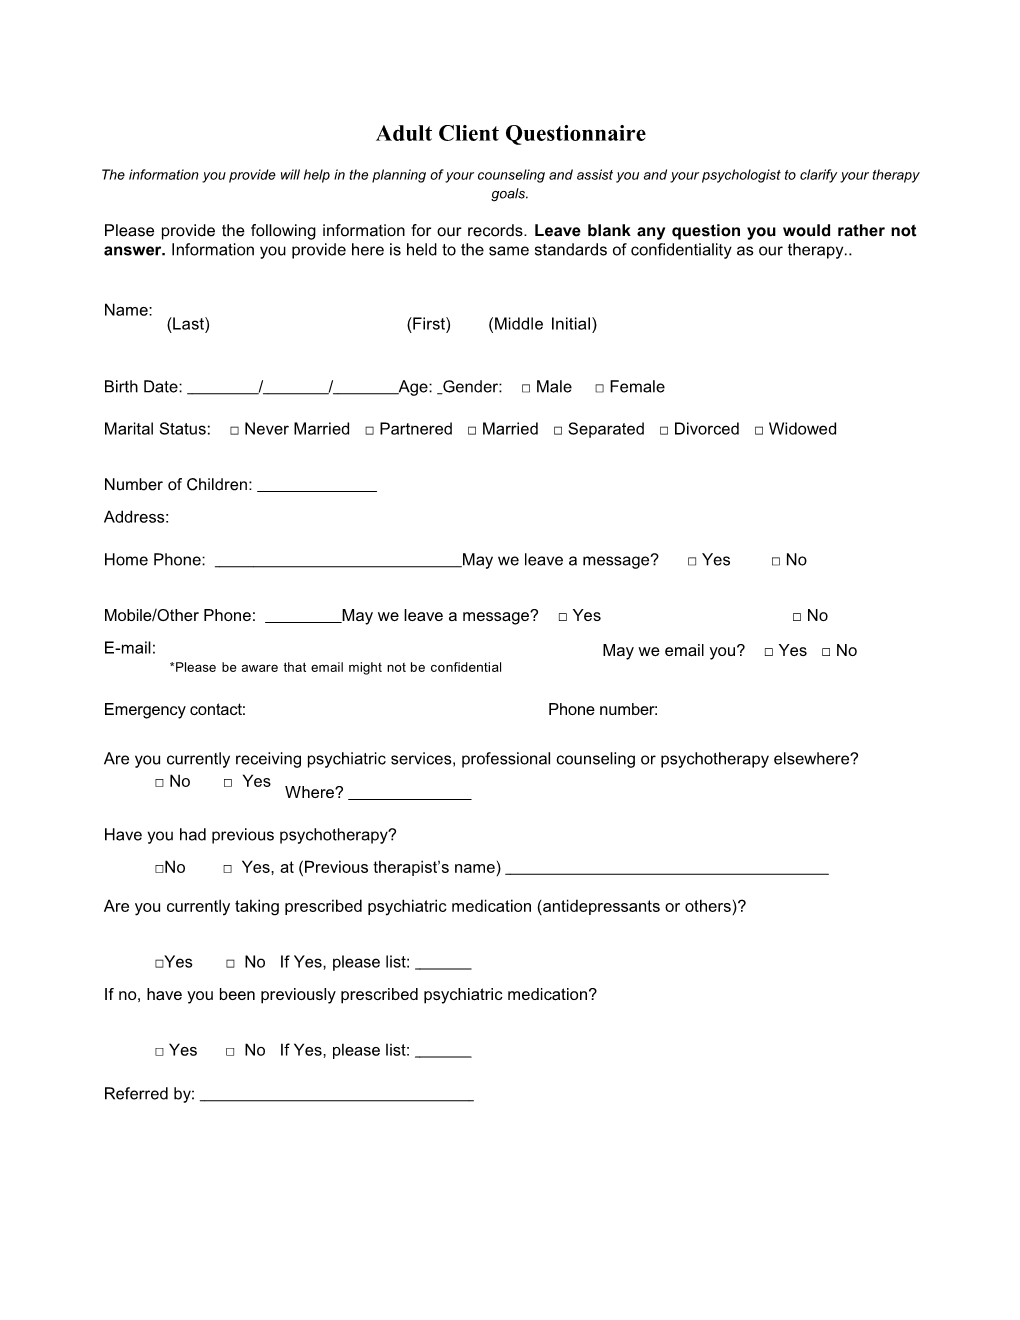 Life Works Counseling Client Intake Form